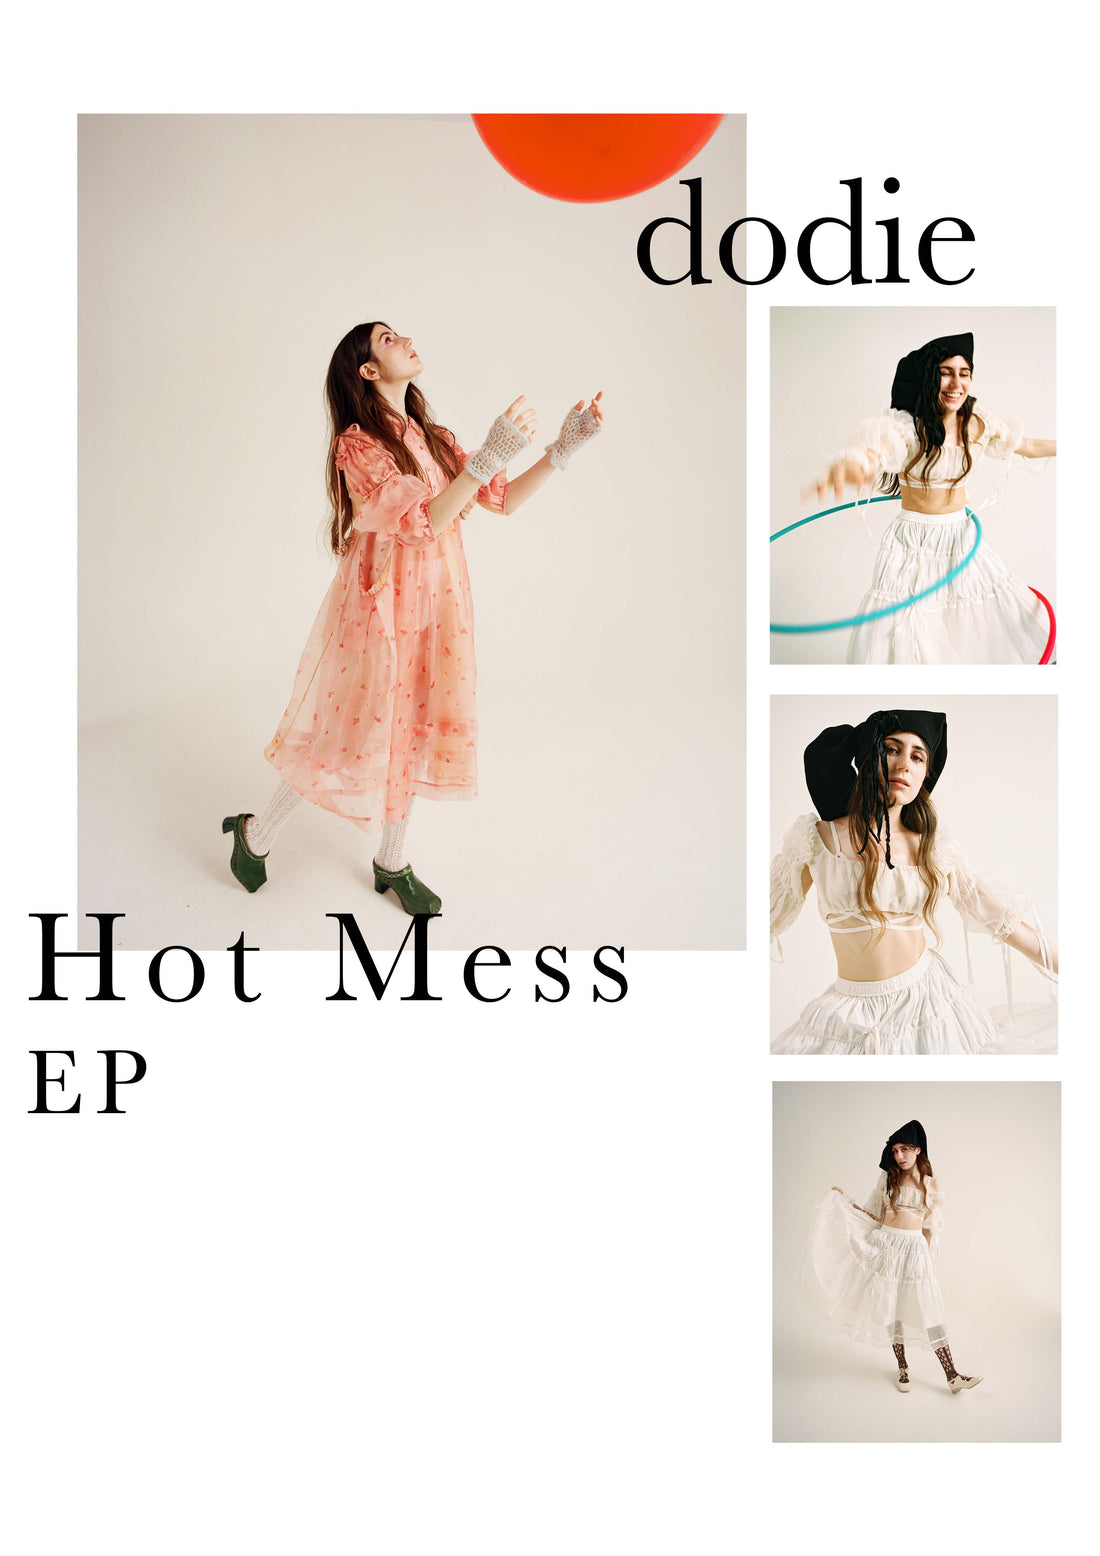 Dodie-Hot mess